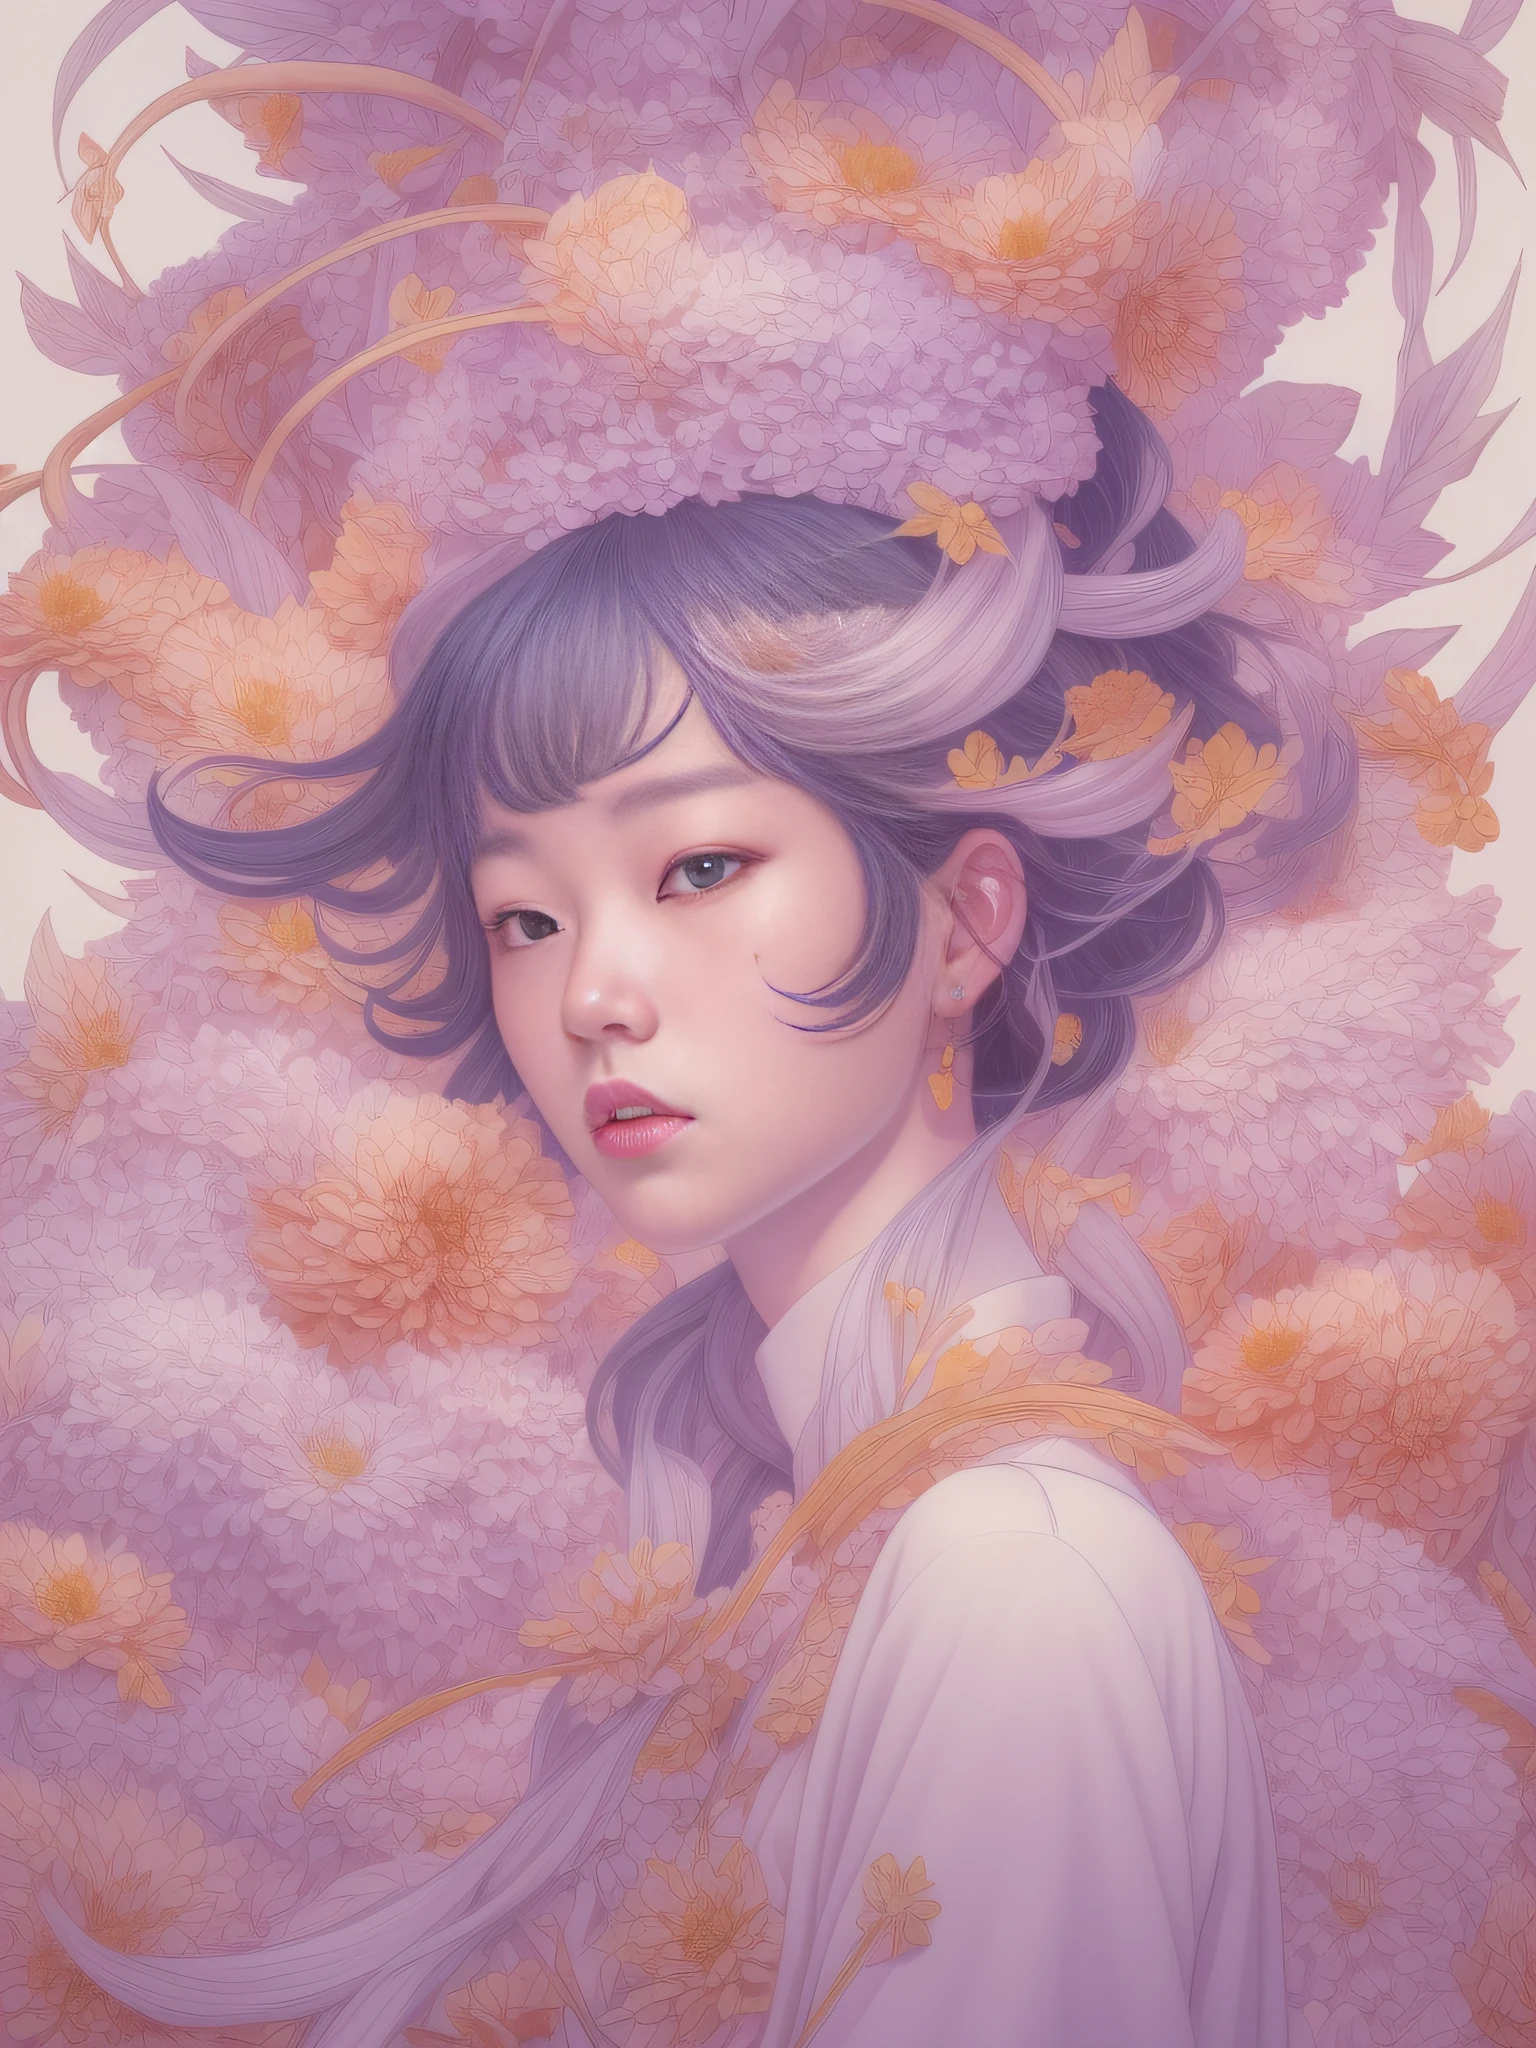 a strongly felt, vigorously articulated, carefully navigated exploration of tradition and civilization by Hsiao-Ron Cheng, James jean, Miho Hirano, takato yamamoto, centipedes extremely moody lighting, detailed facial features, ray tracing, Fujicolor, cowboy shot, 8K, retina, anatomically correct, textured skin, award winning, 16k